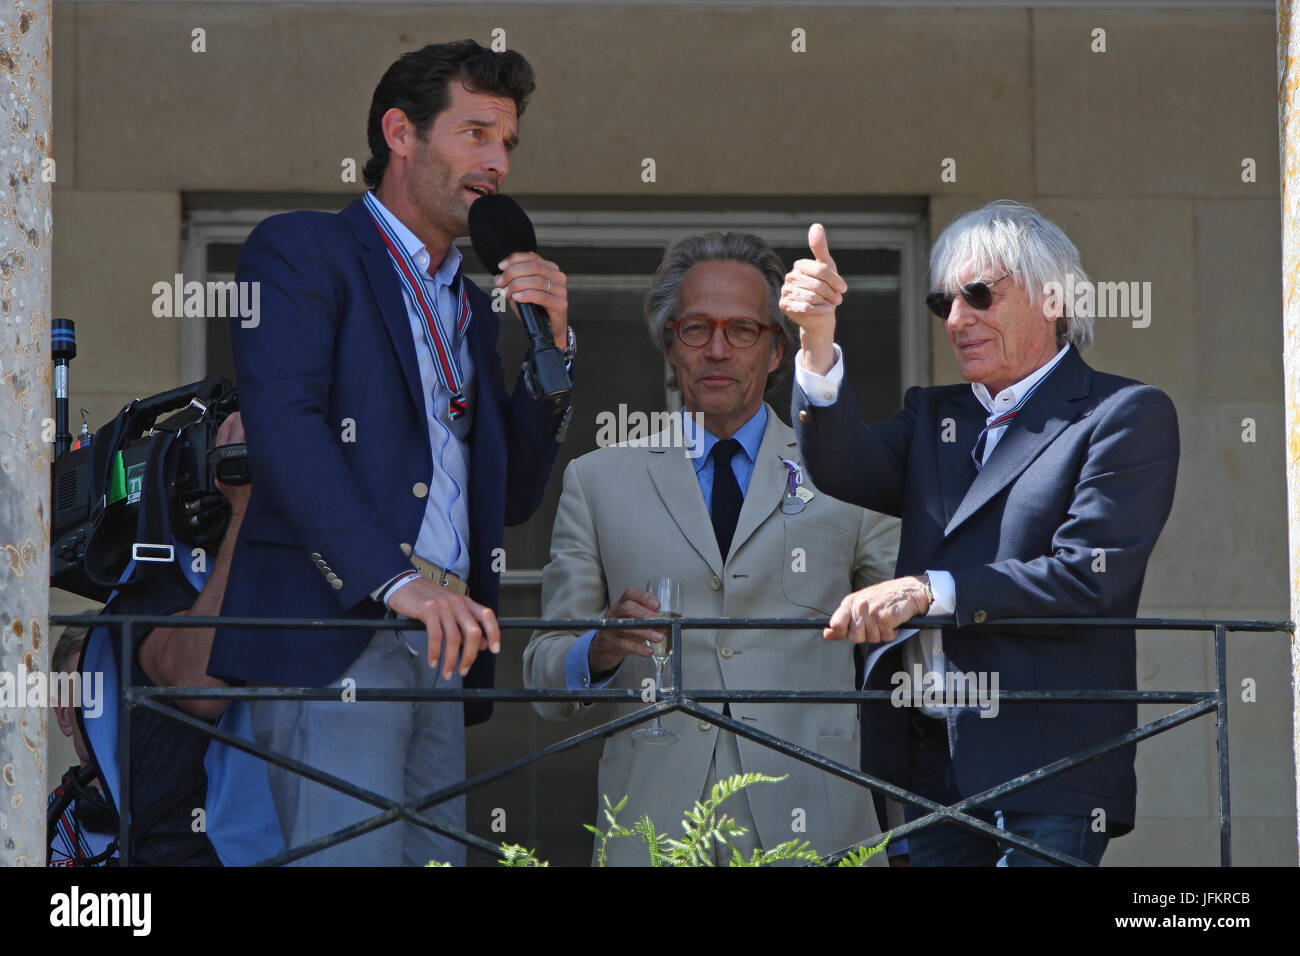 Goodwood, UK. 2nd July, 2017. Mark Webber presents Five Ages of Bernie Ecclestone celebration with Bernie Ecclestone and Lord March Credit: Malcolm Greig/Alamy Live News Stock Photo